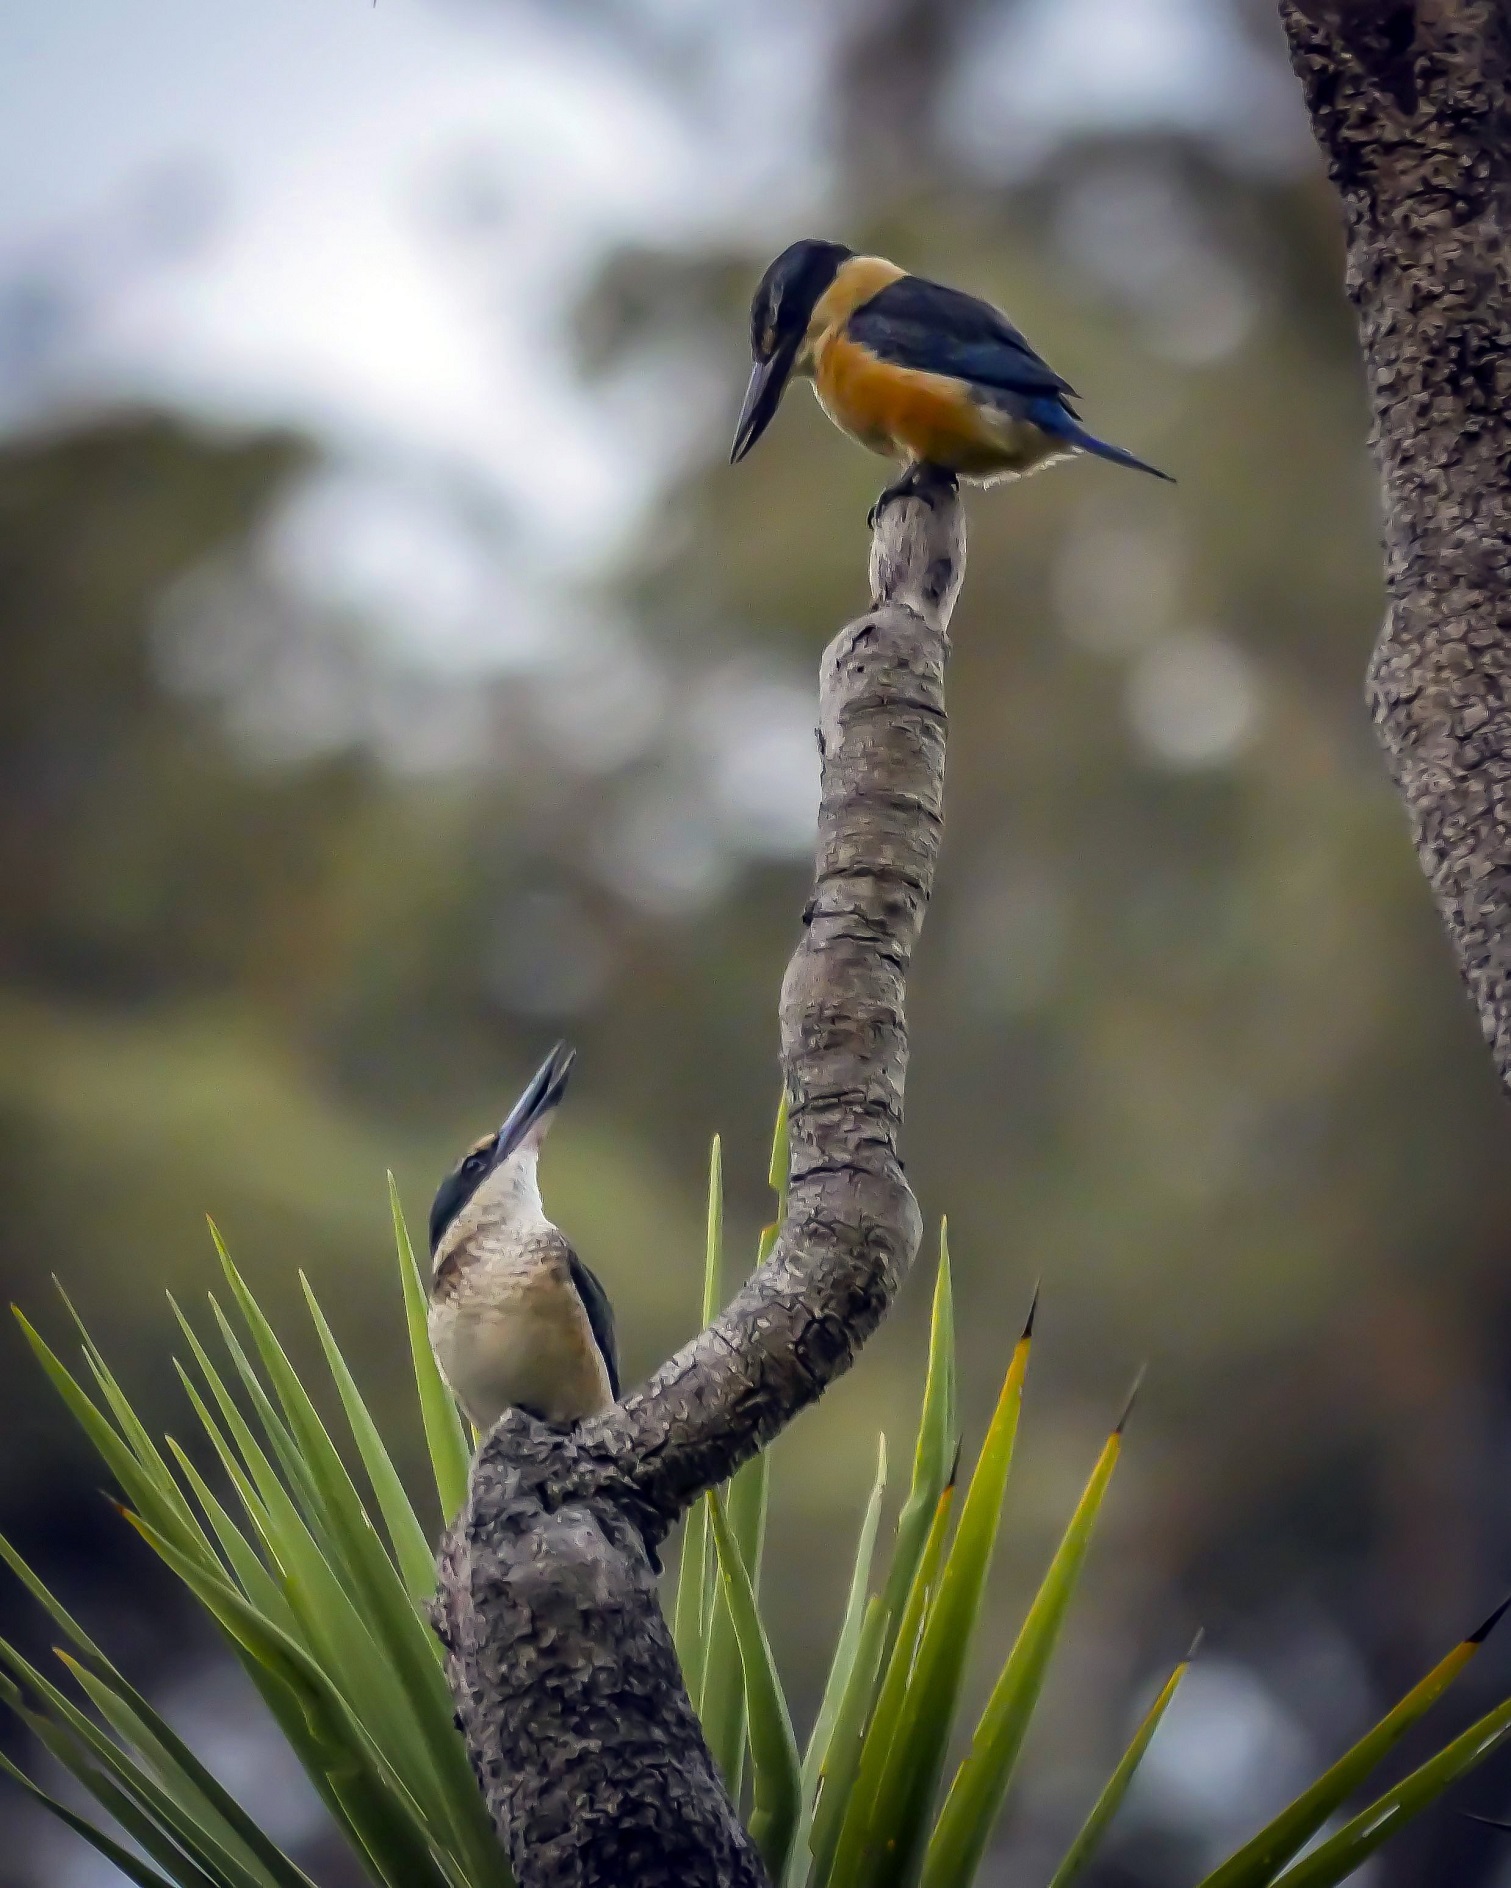 This image entitled Pair of Kingfishers, by young Dunedin photographer Jack Aubin, was the...